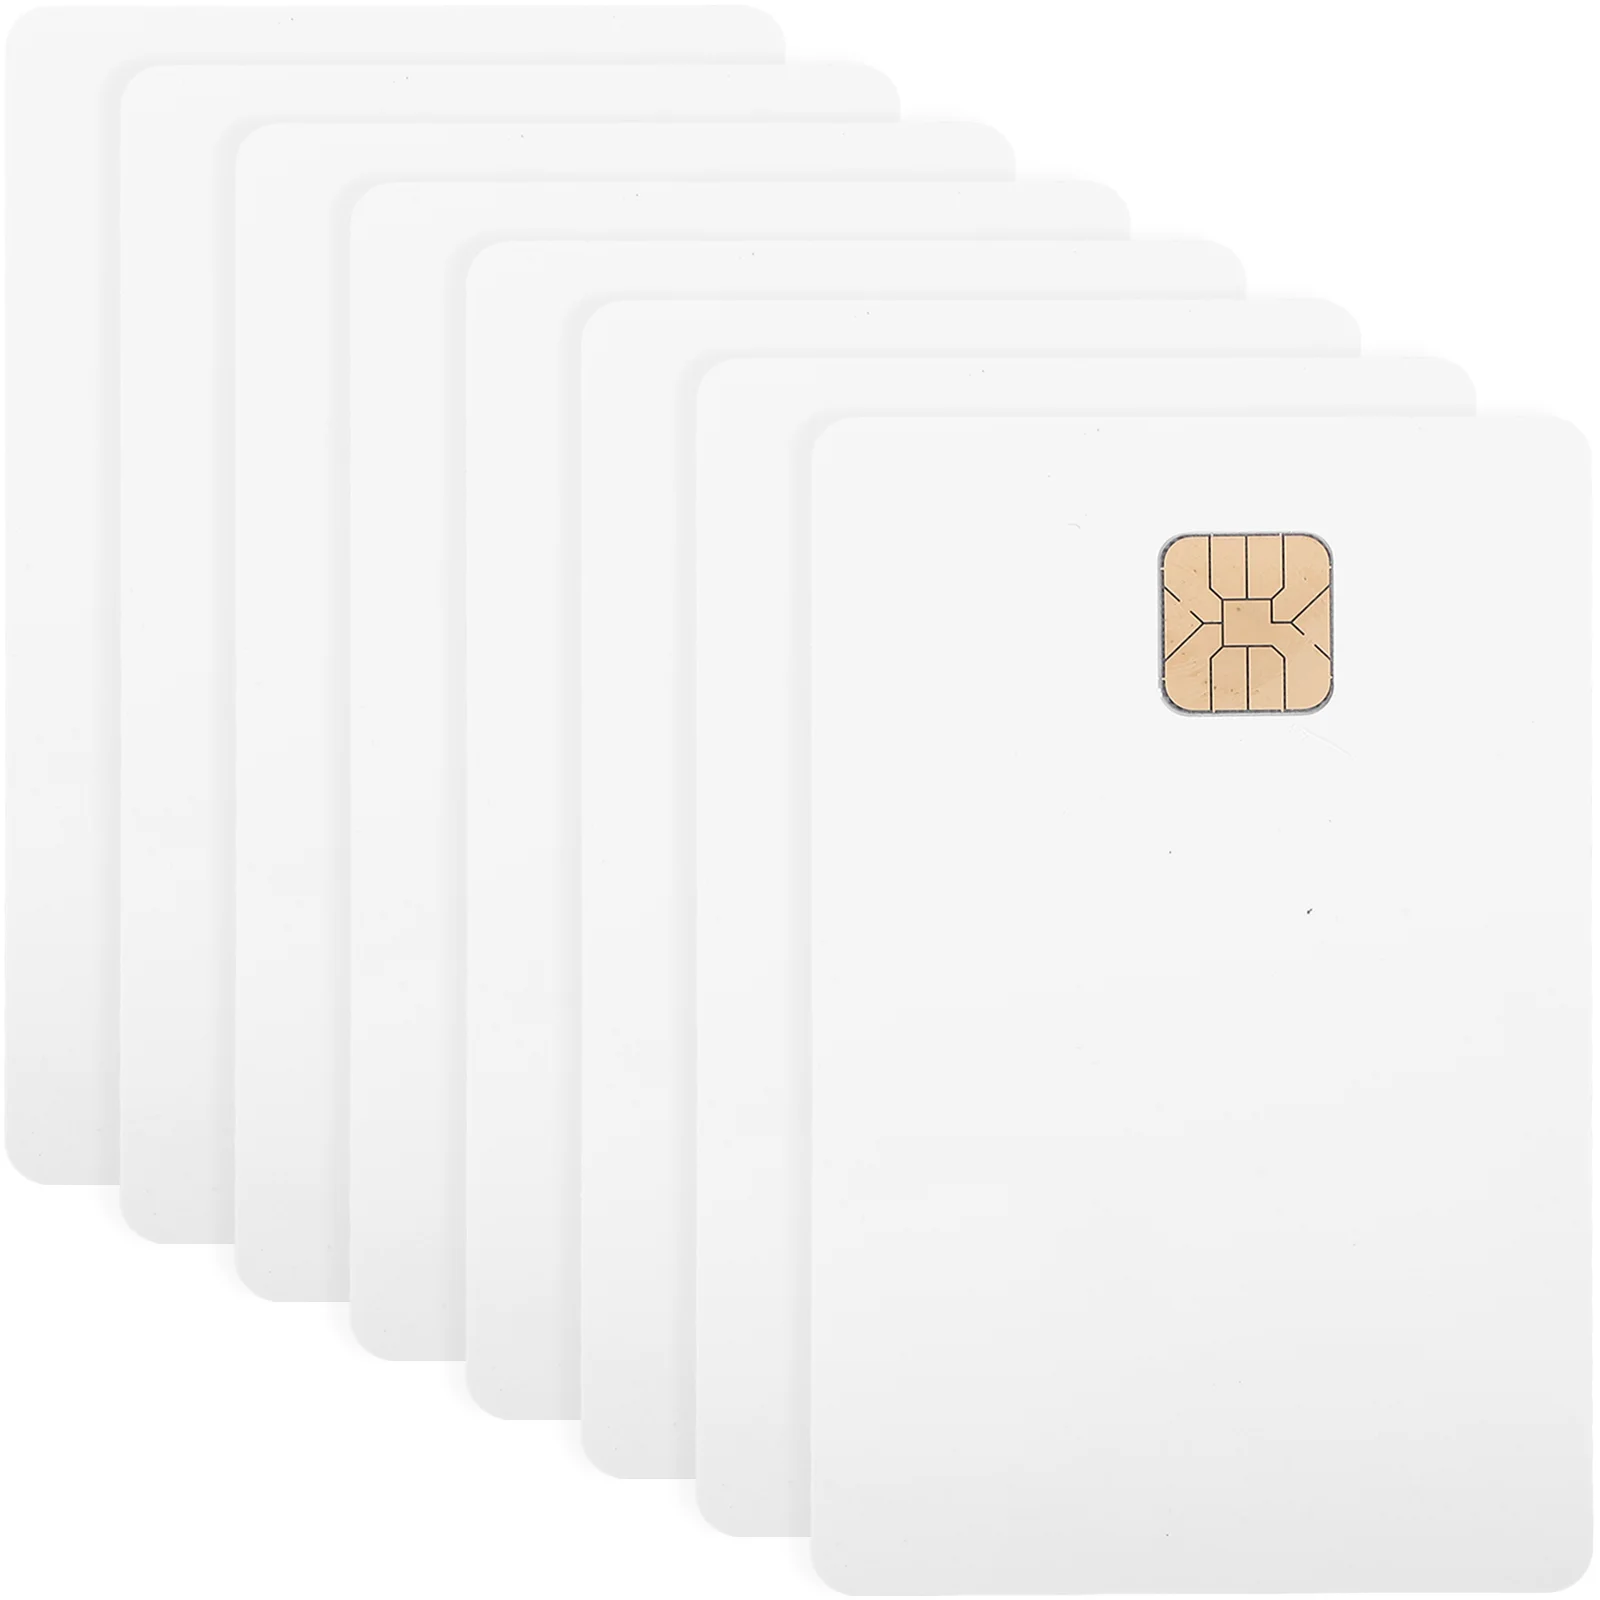 

IC Cards Chip PVC Cards PVC Blank Cards Pvc Cards Blank Credit Cards With Chips Blanks Cards White Credit Cards for Office